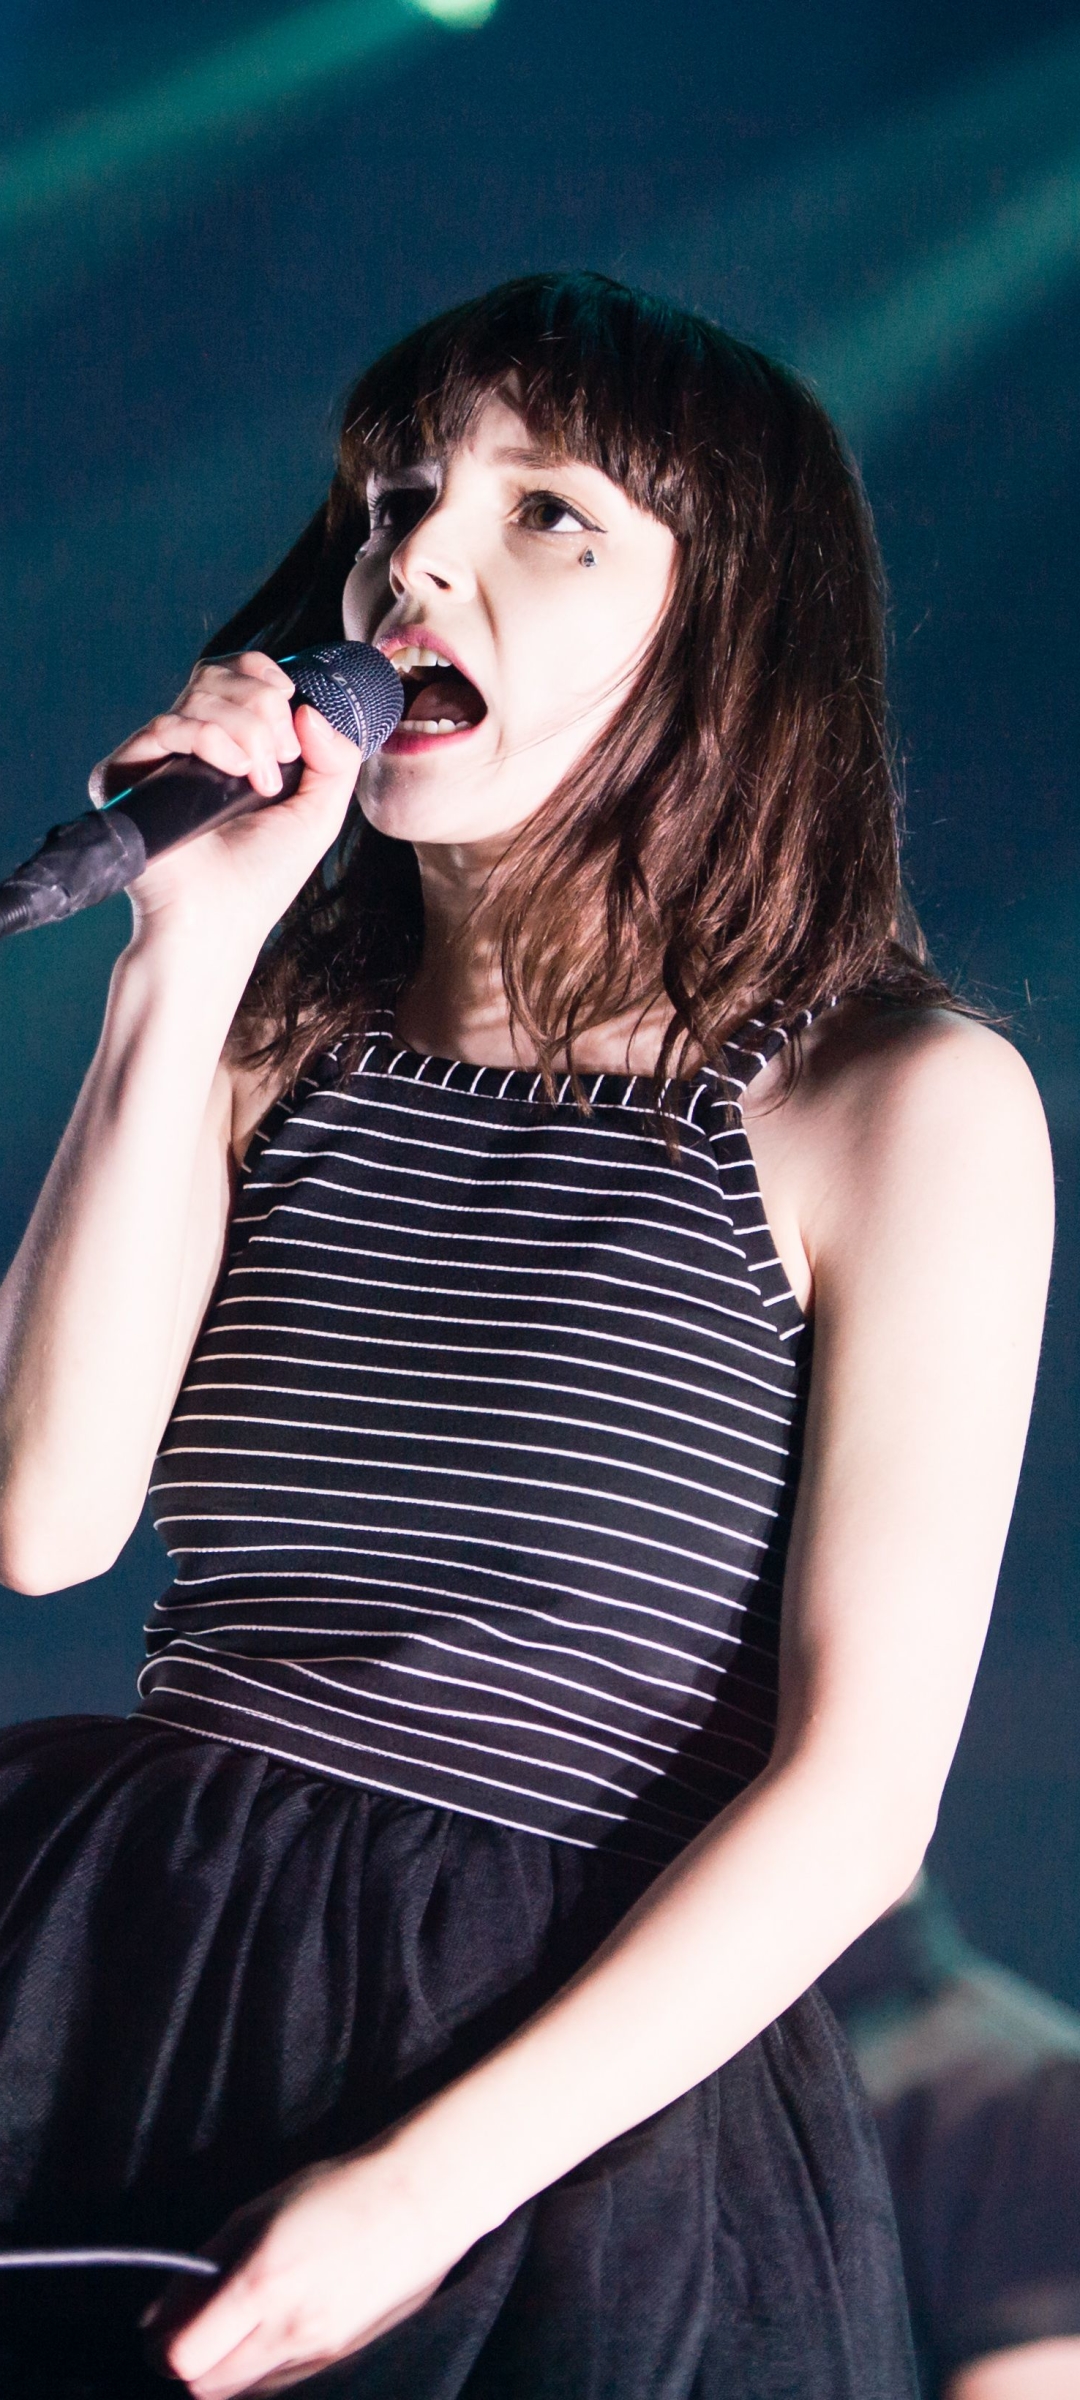 android music, chvrches